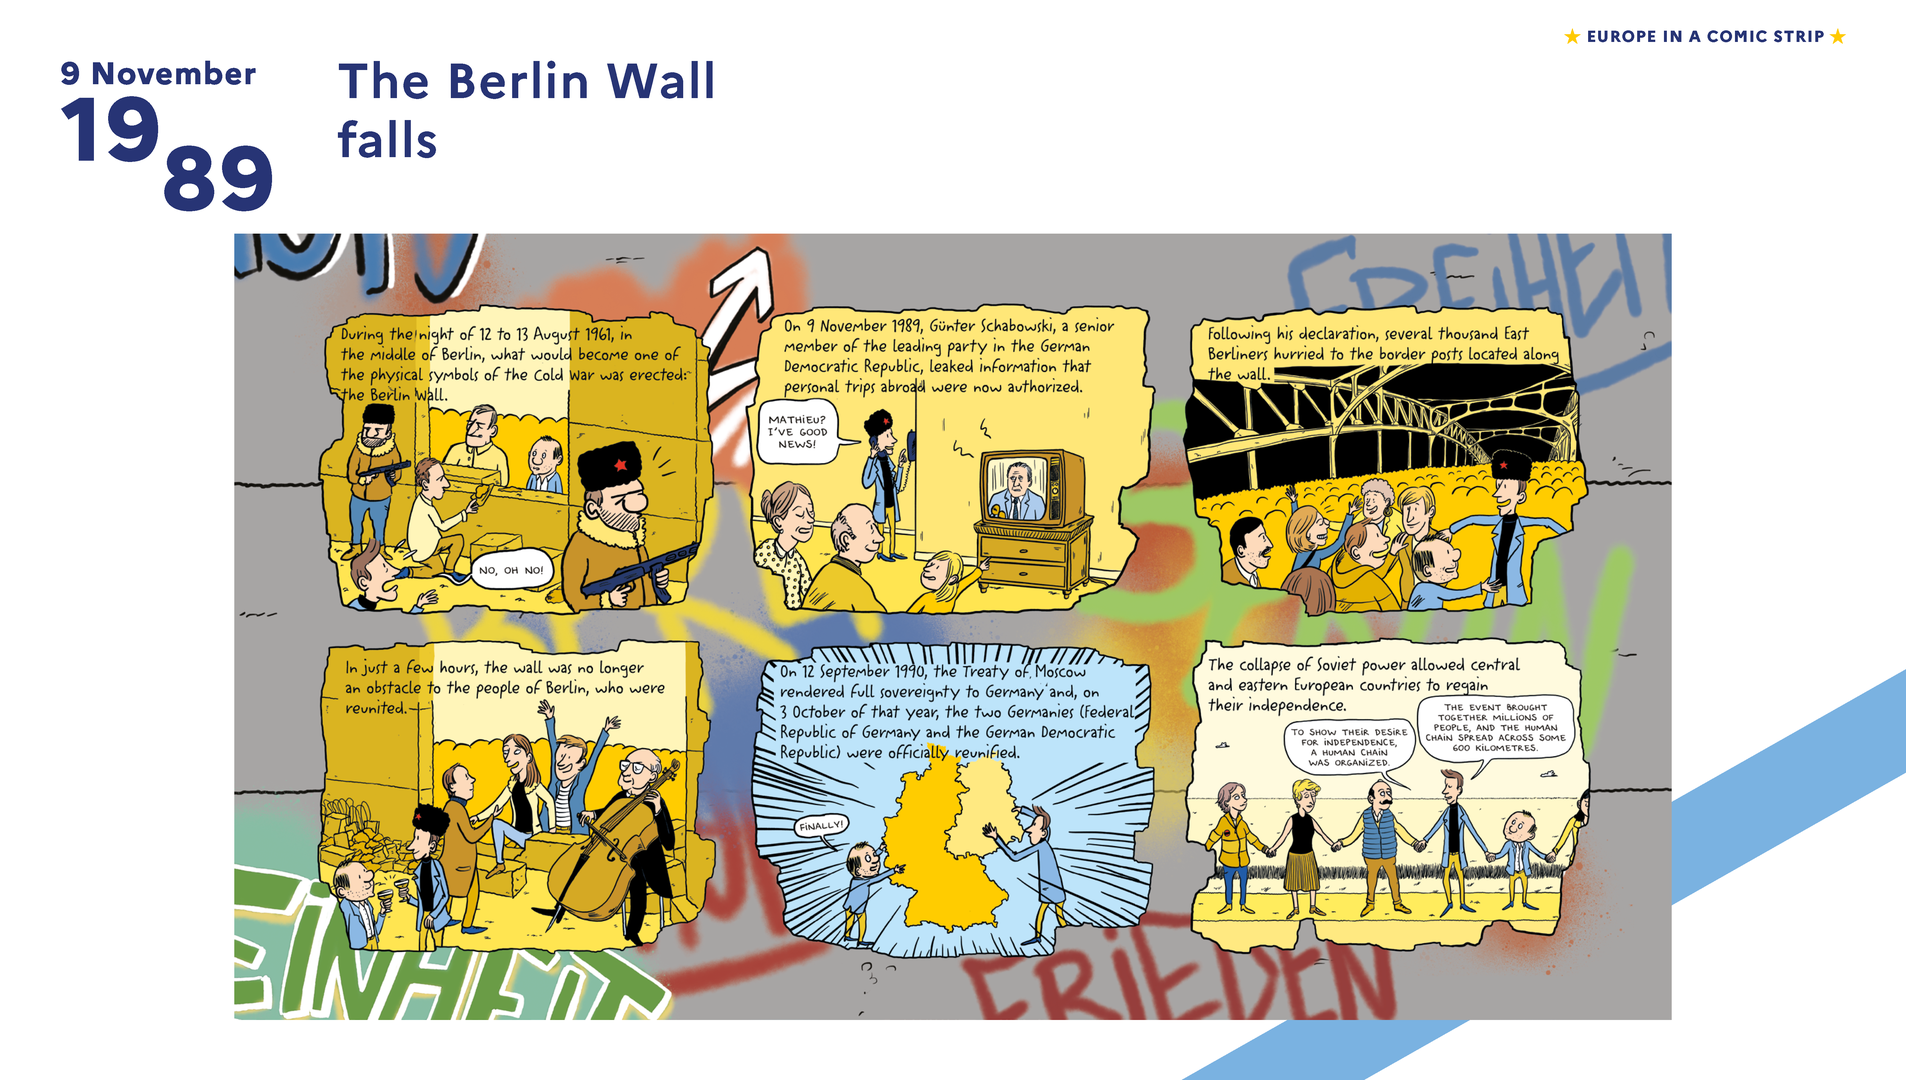 Exhibition: Europe in a Comic Strip